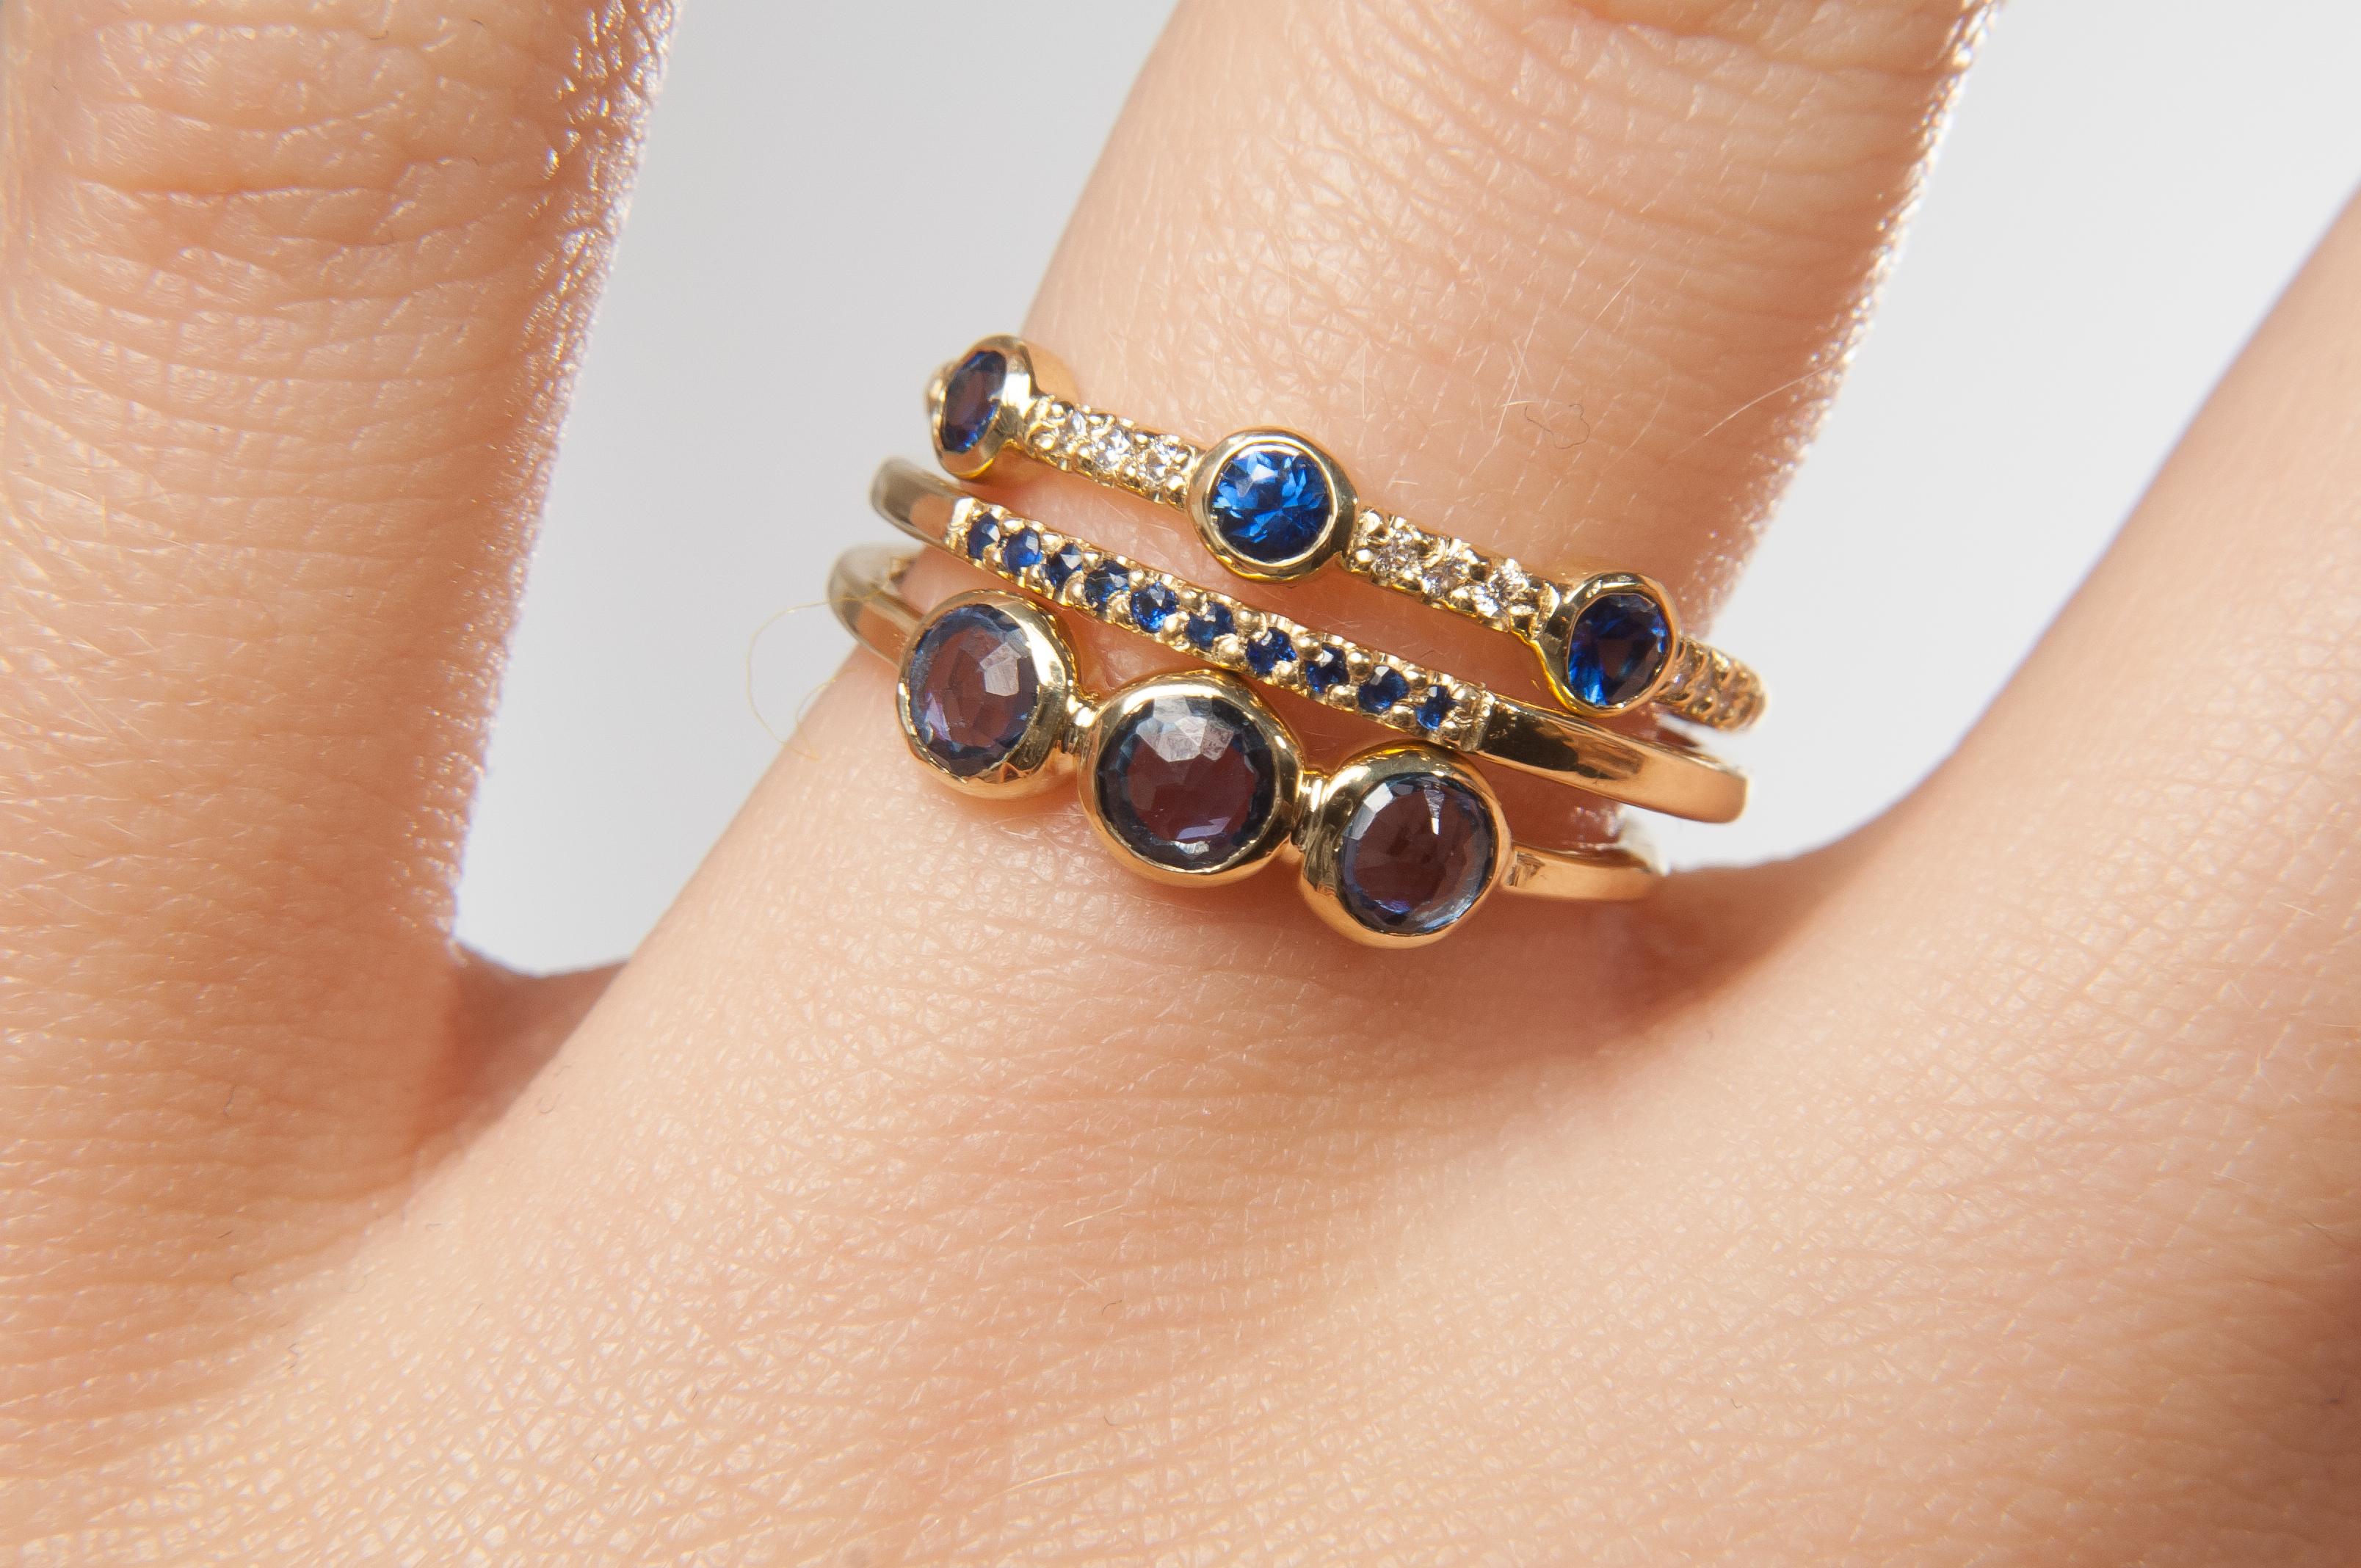 Update your look with this modern take on a classic three stone ring.

18K yellow gold band set with three bezel set 0.12” blue sapphires.

Size 7